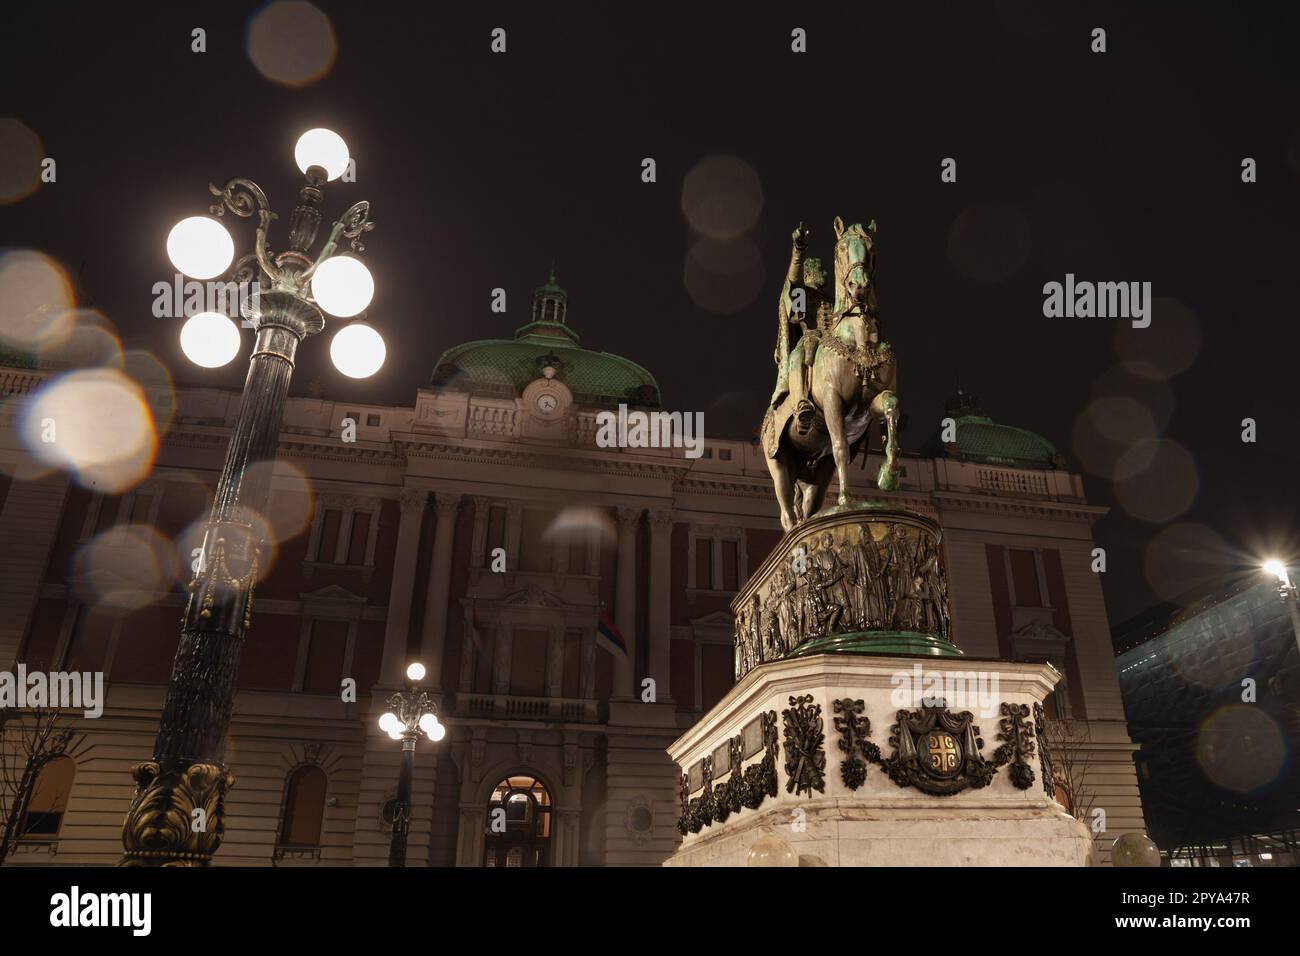 Picture of the national museum of Serbia in belgrade with the statue of Prince Mihailo in front, on Trg Republike, also called republic square at nigh Stock Photo